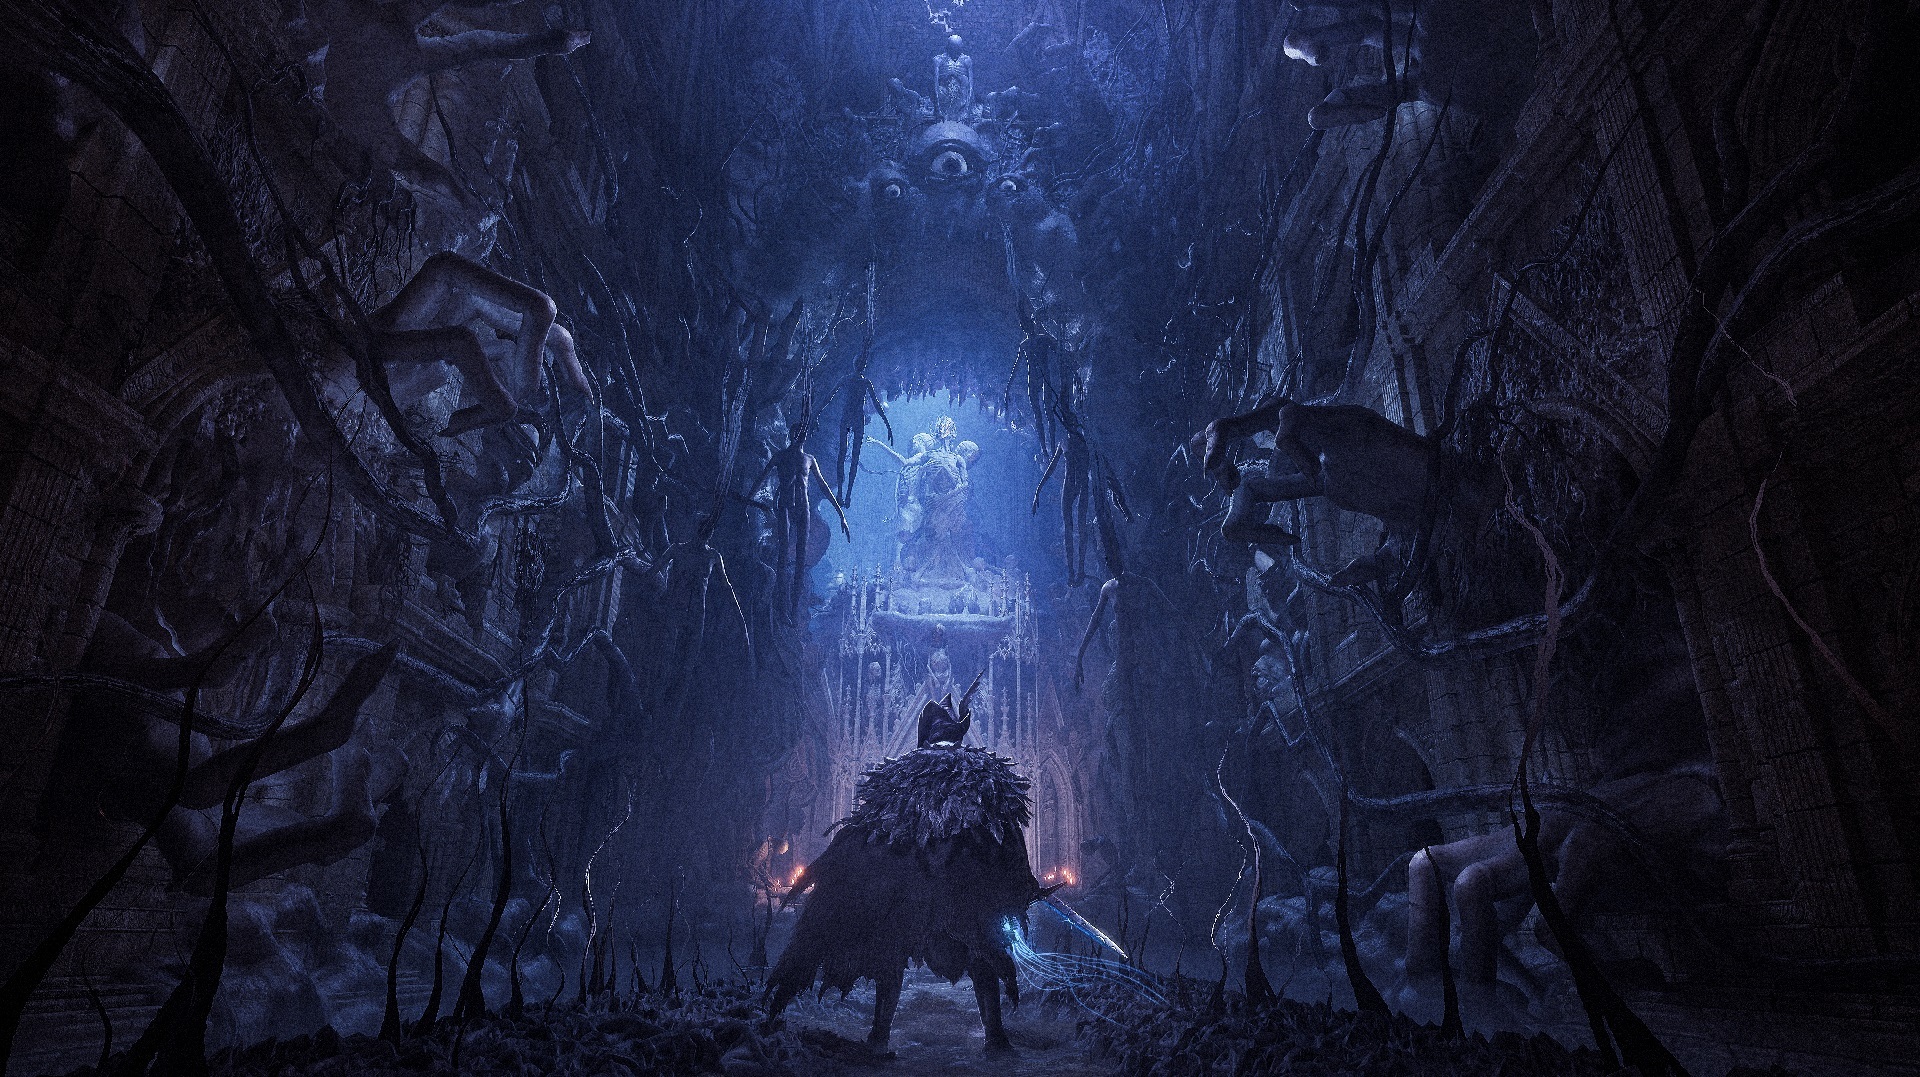 Lords of the Fallen Community - (Xbox one/PS4/Xbox Series X, S/PS5/PC